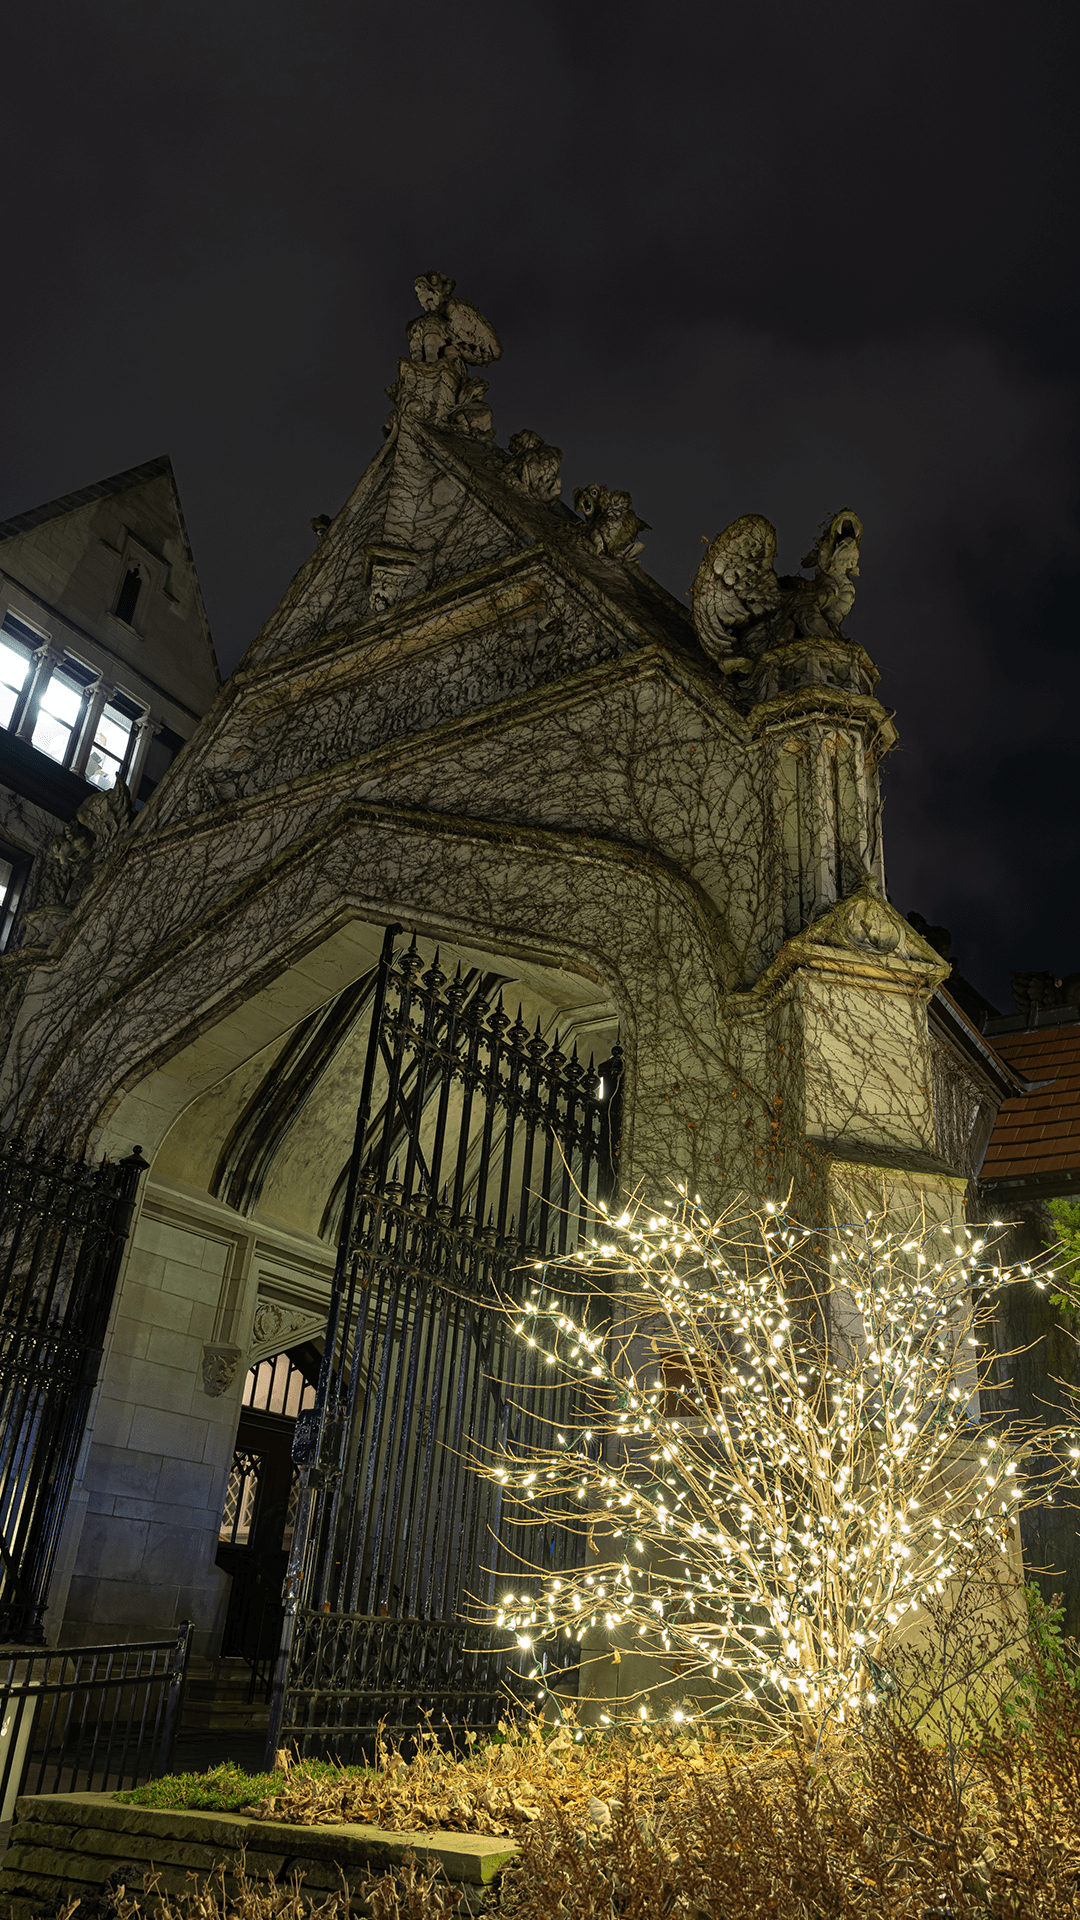 Gothic arch at night with white holiday lights.